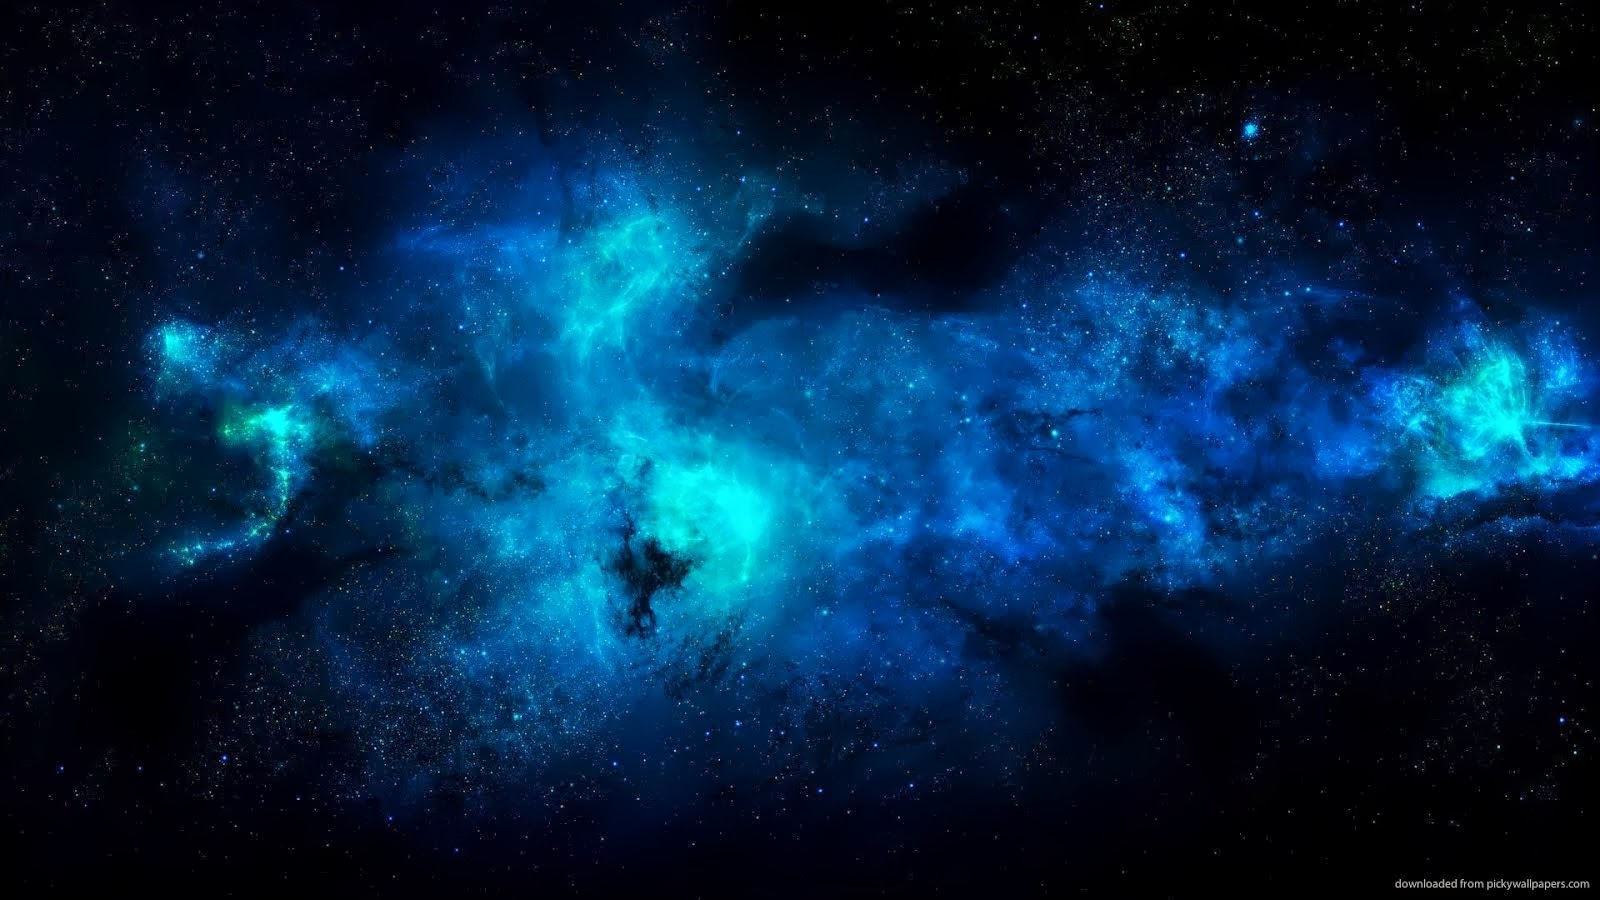 Space Wallpaper 1920x1080 in high resolution for free High Definition